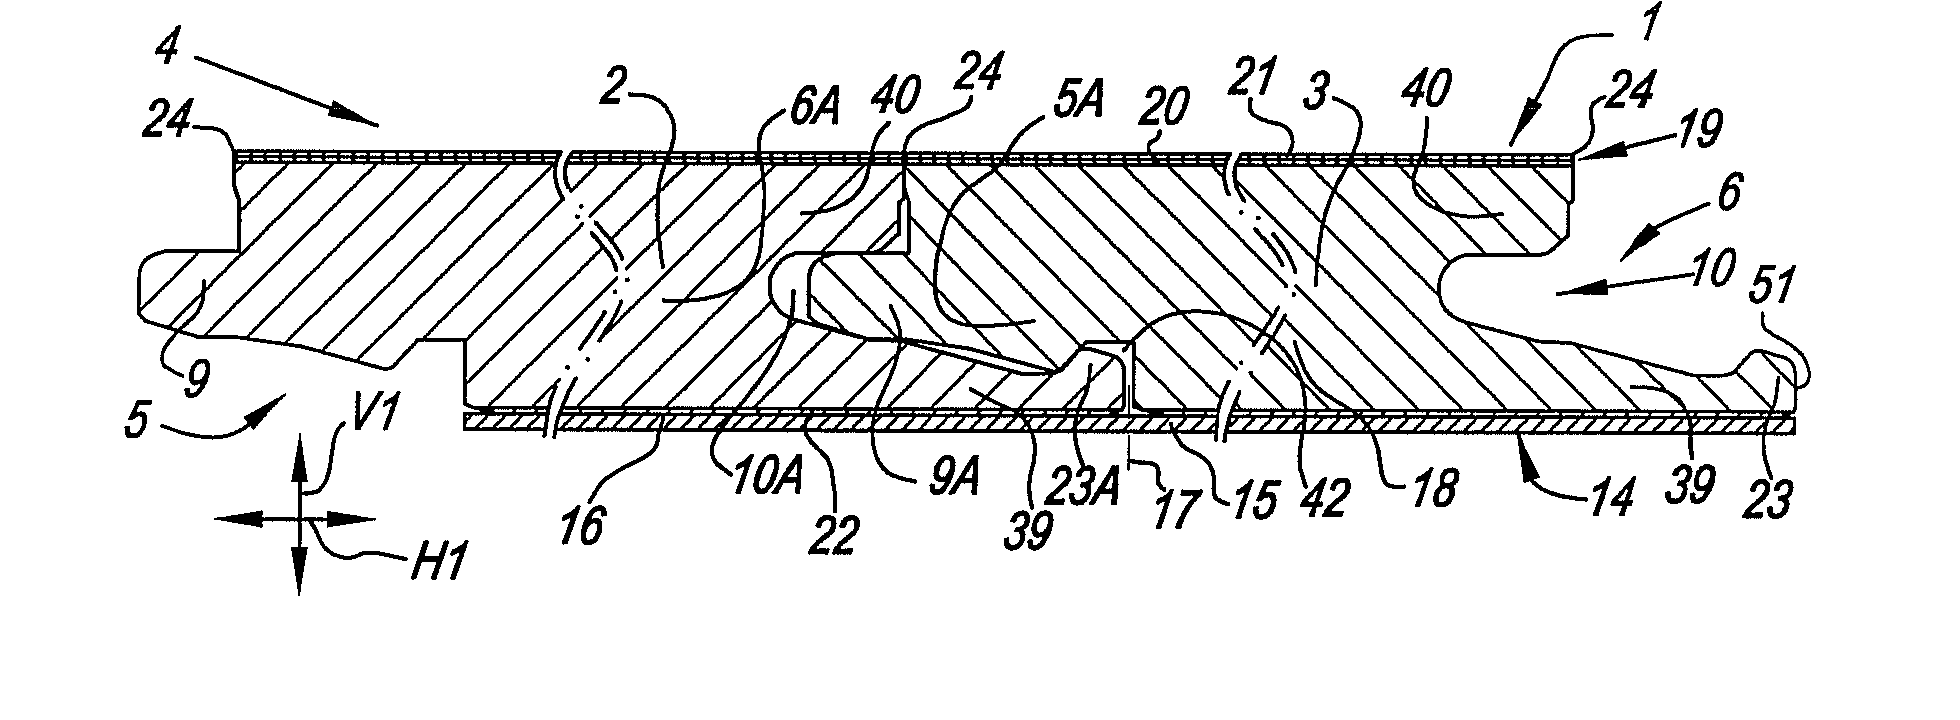 Floor Element, Locking System for Floor Elements, Floor Covering and Method for Composing Such Floor Elements to a Floor Covering